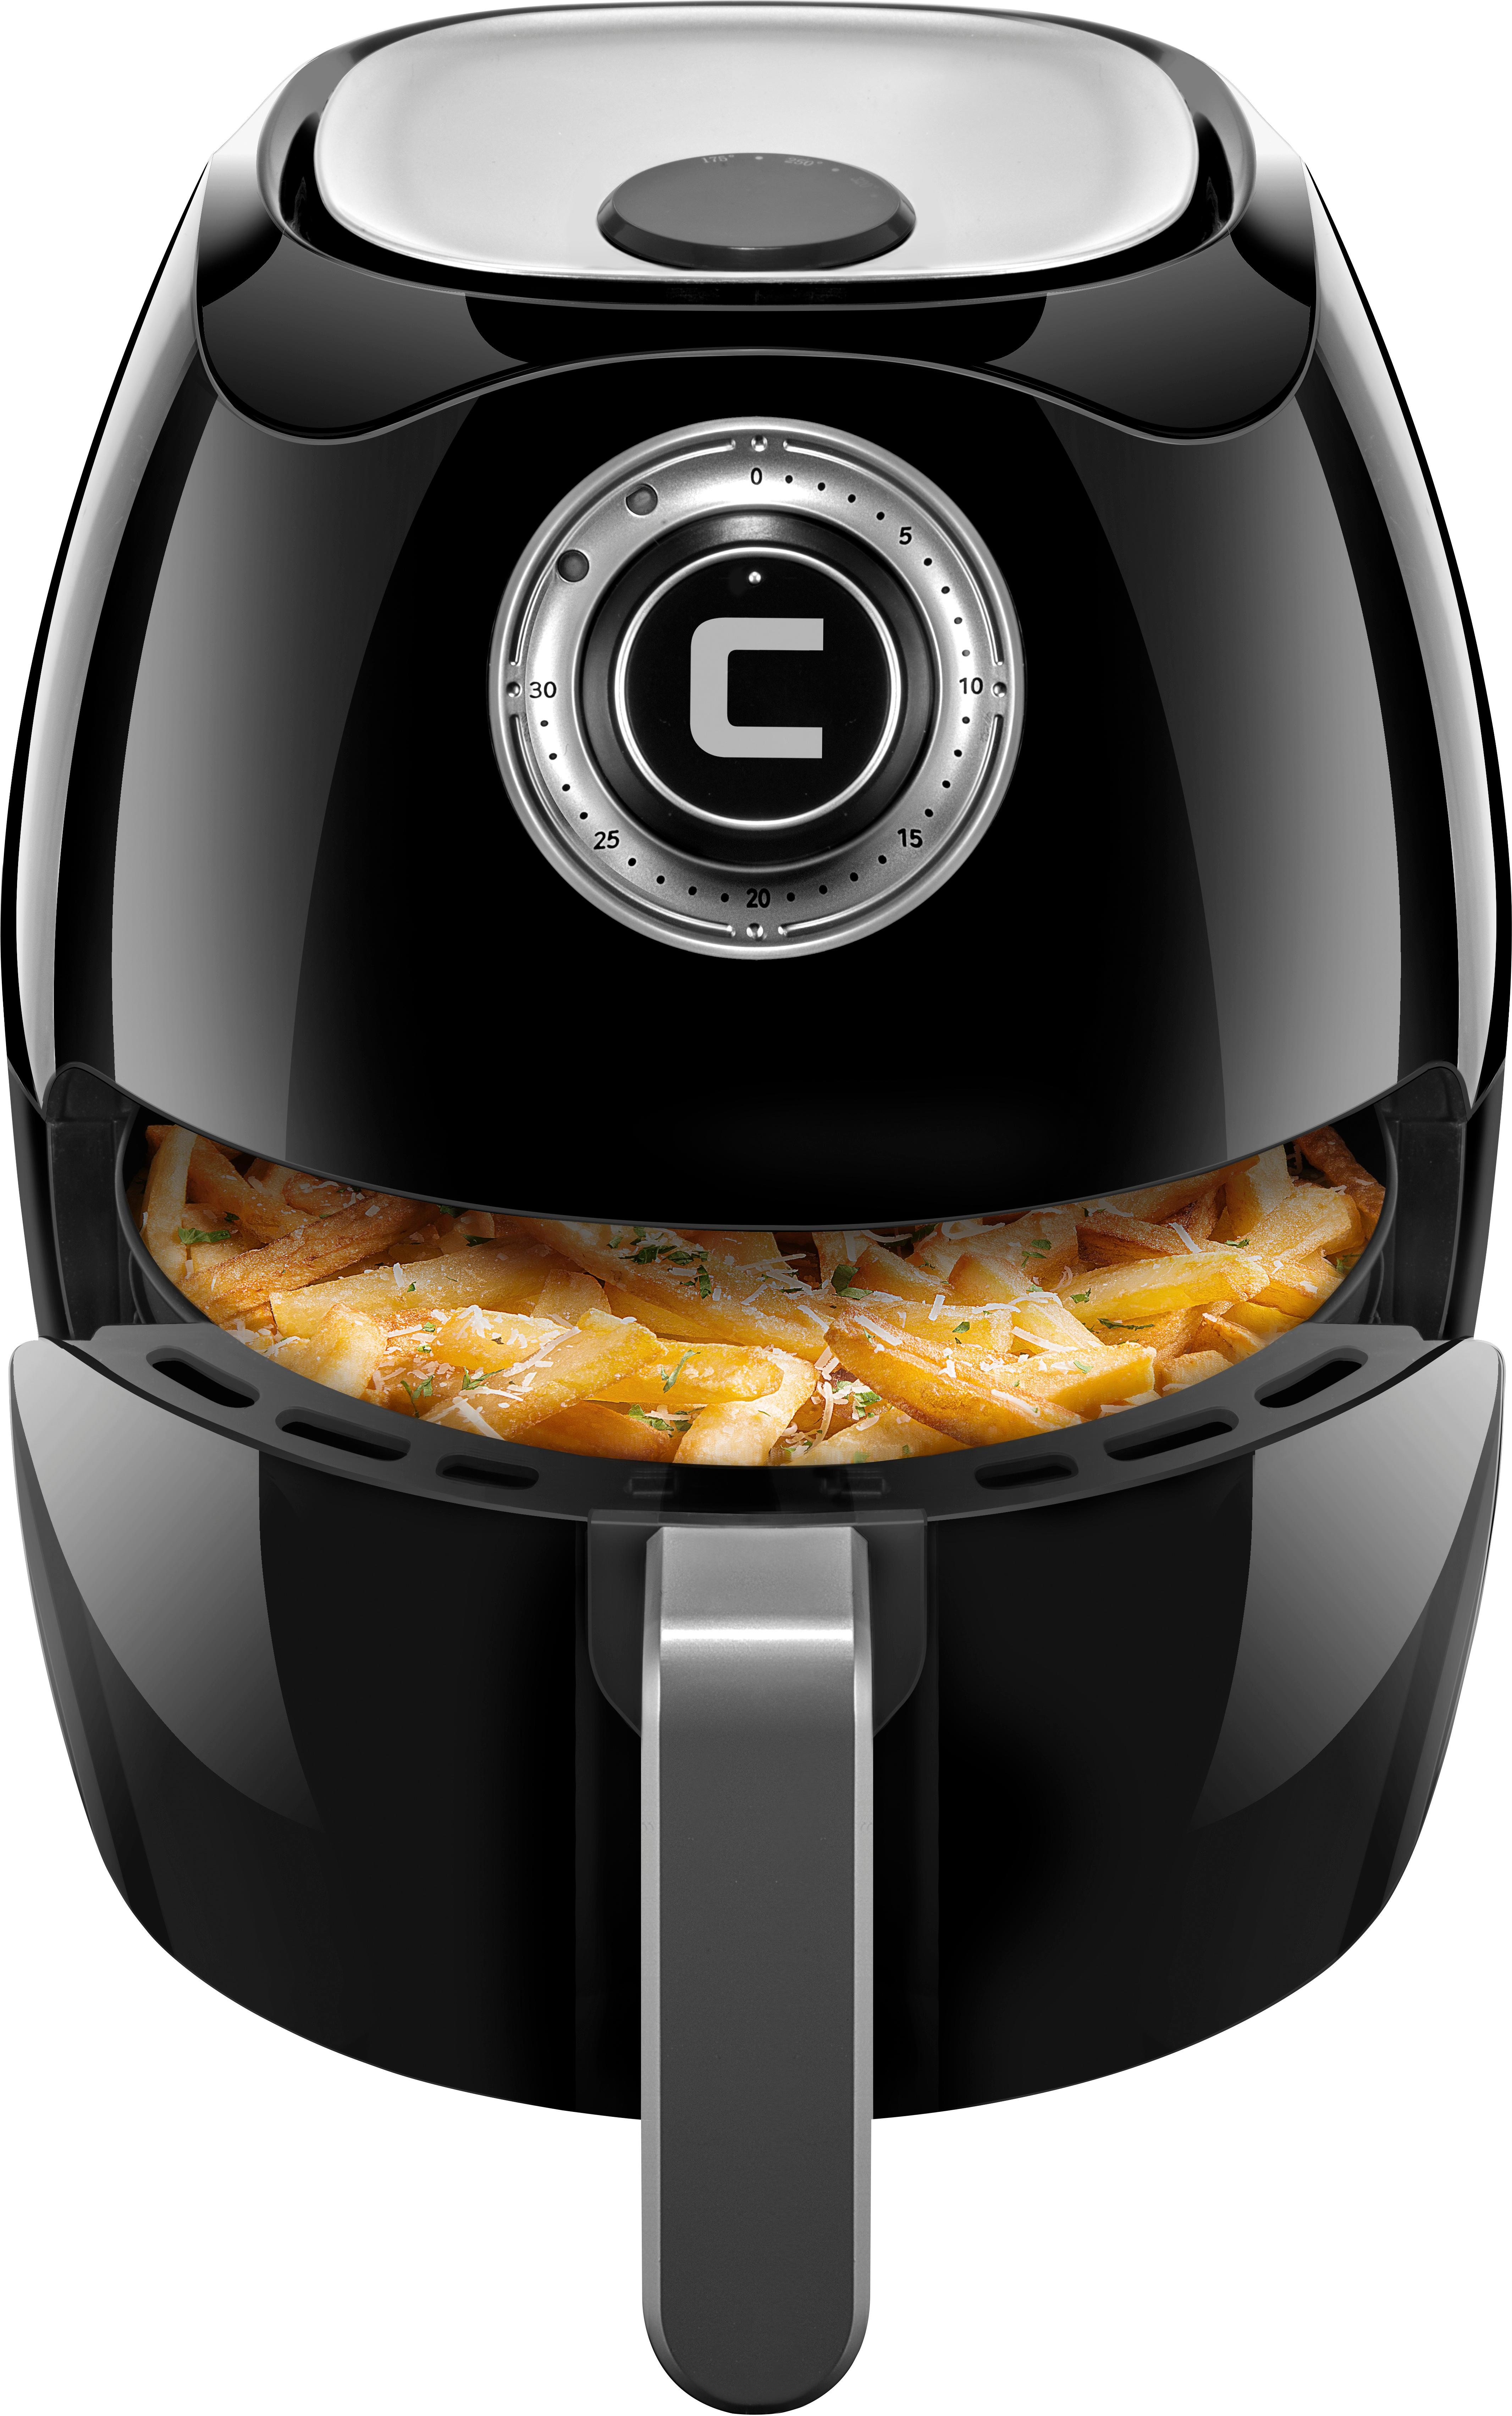 Chefman Analog Air Fryer with Dual Control - Black, 3.5 L - Fred Meyer